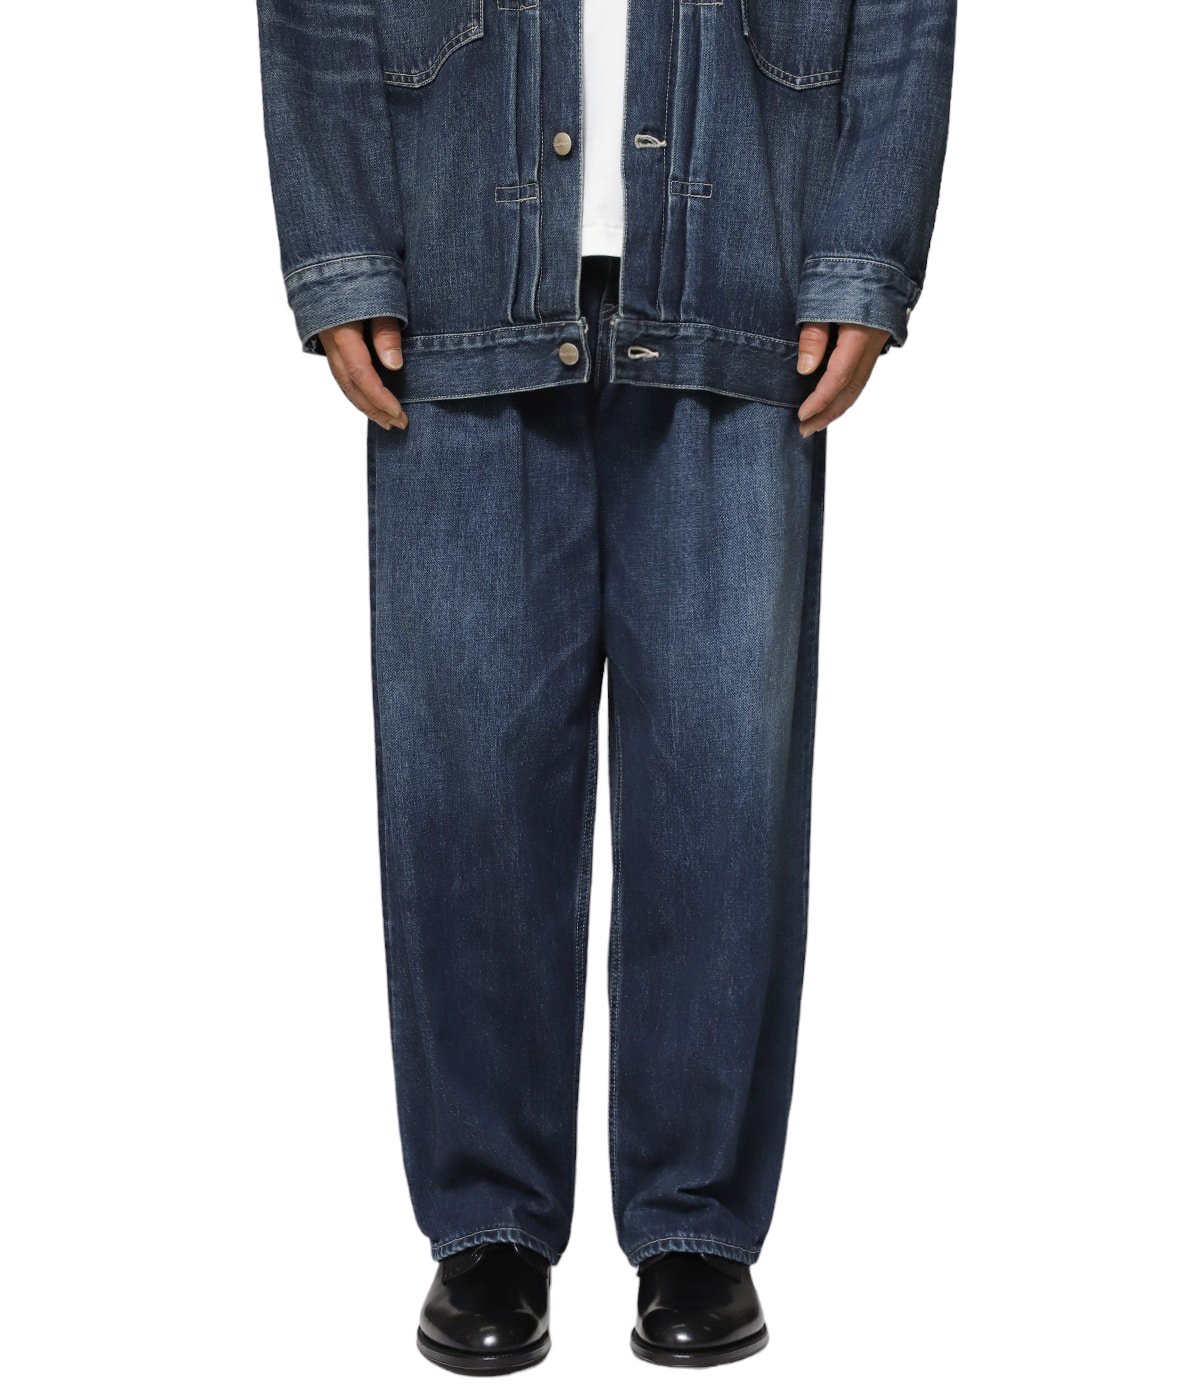 Selvage Denim Two Tuck Pants | Graphpaper(グラフペーパー) / パンツ ...